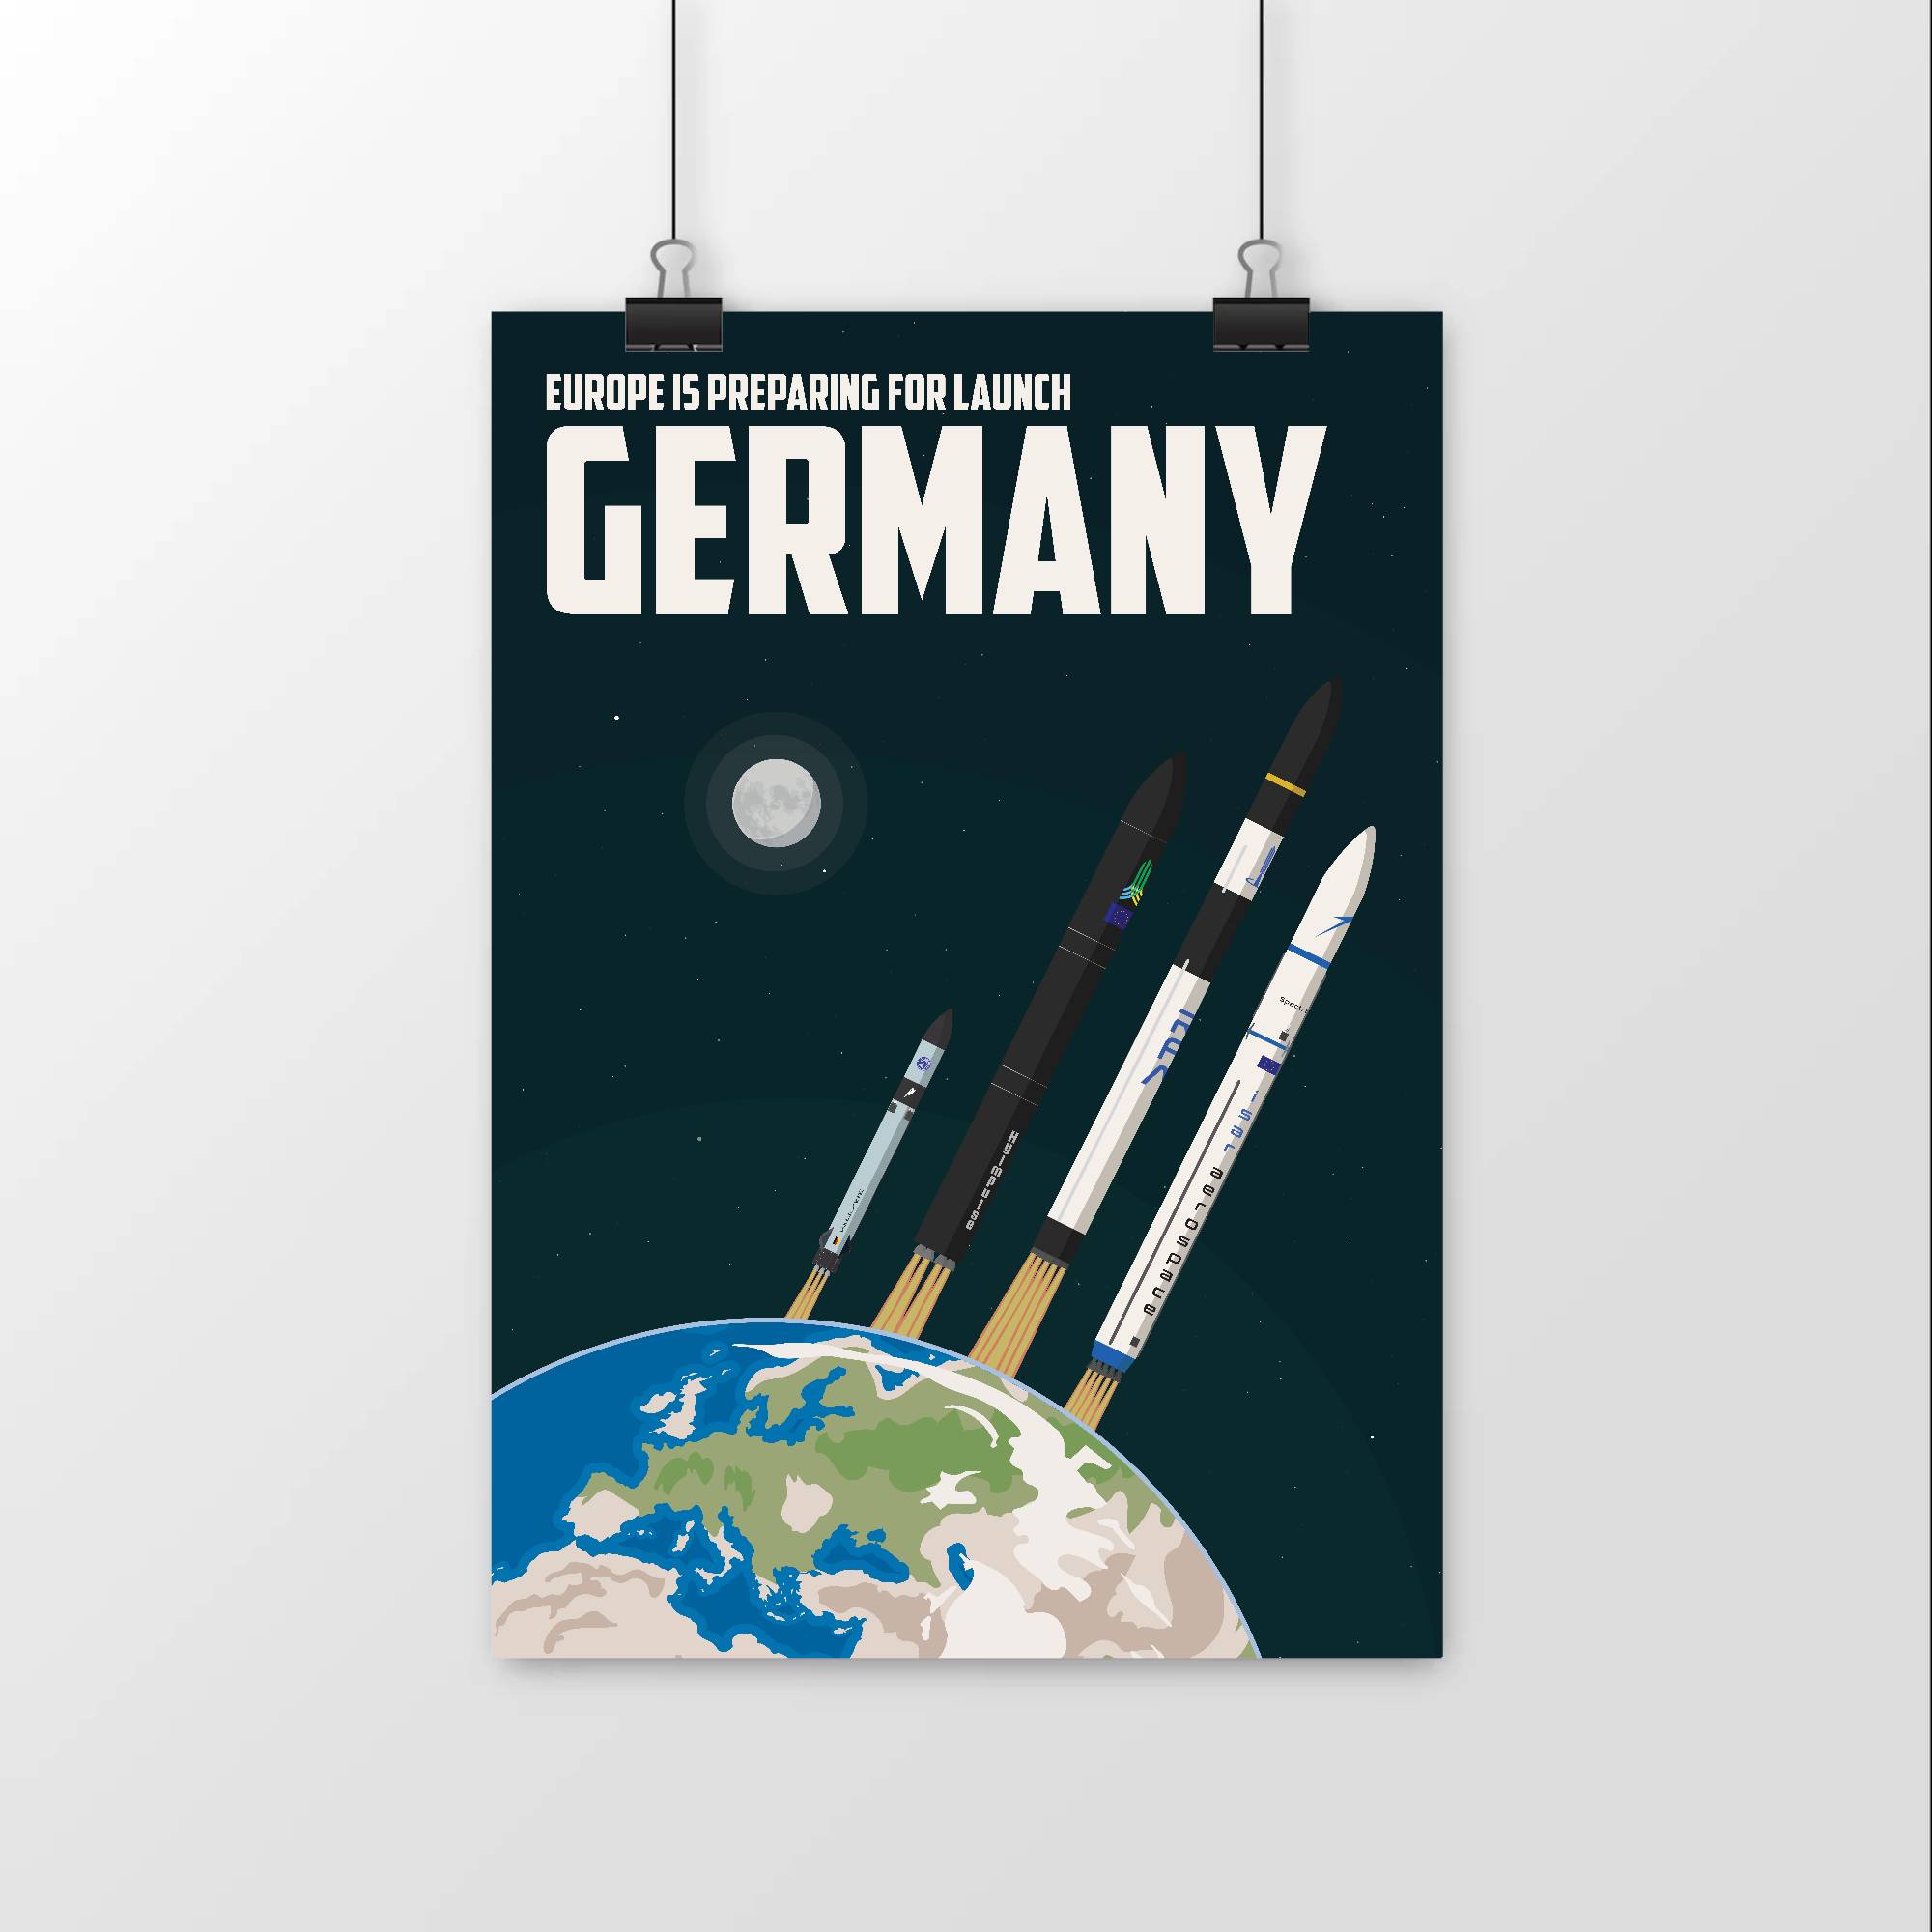 European Spaceflight Europe is preparing for launch posters: Germany Launch Poster.